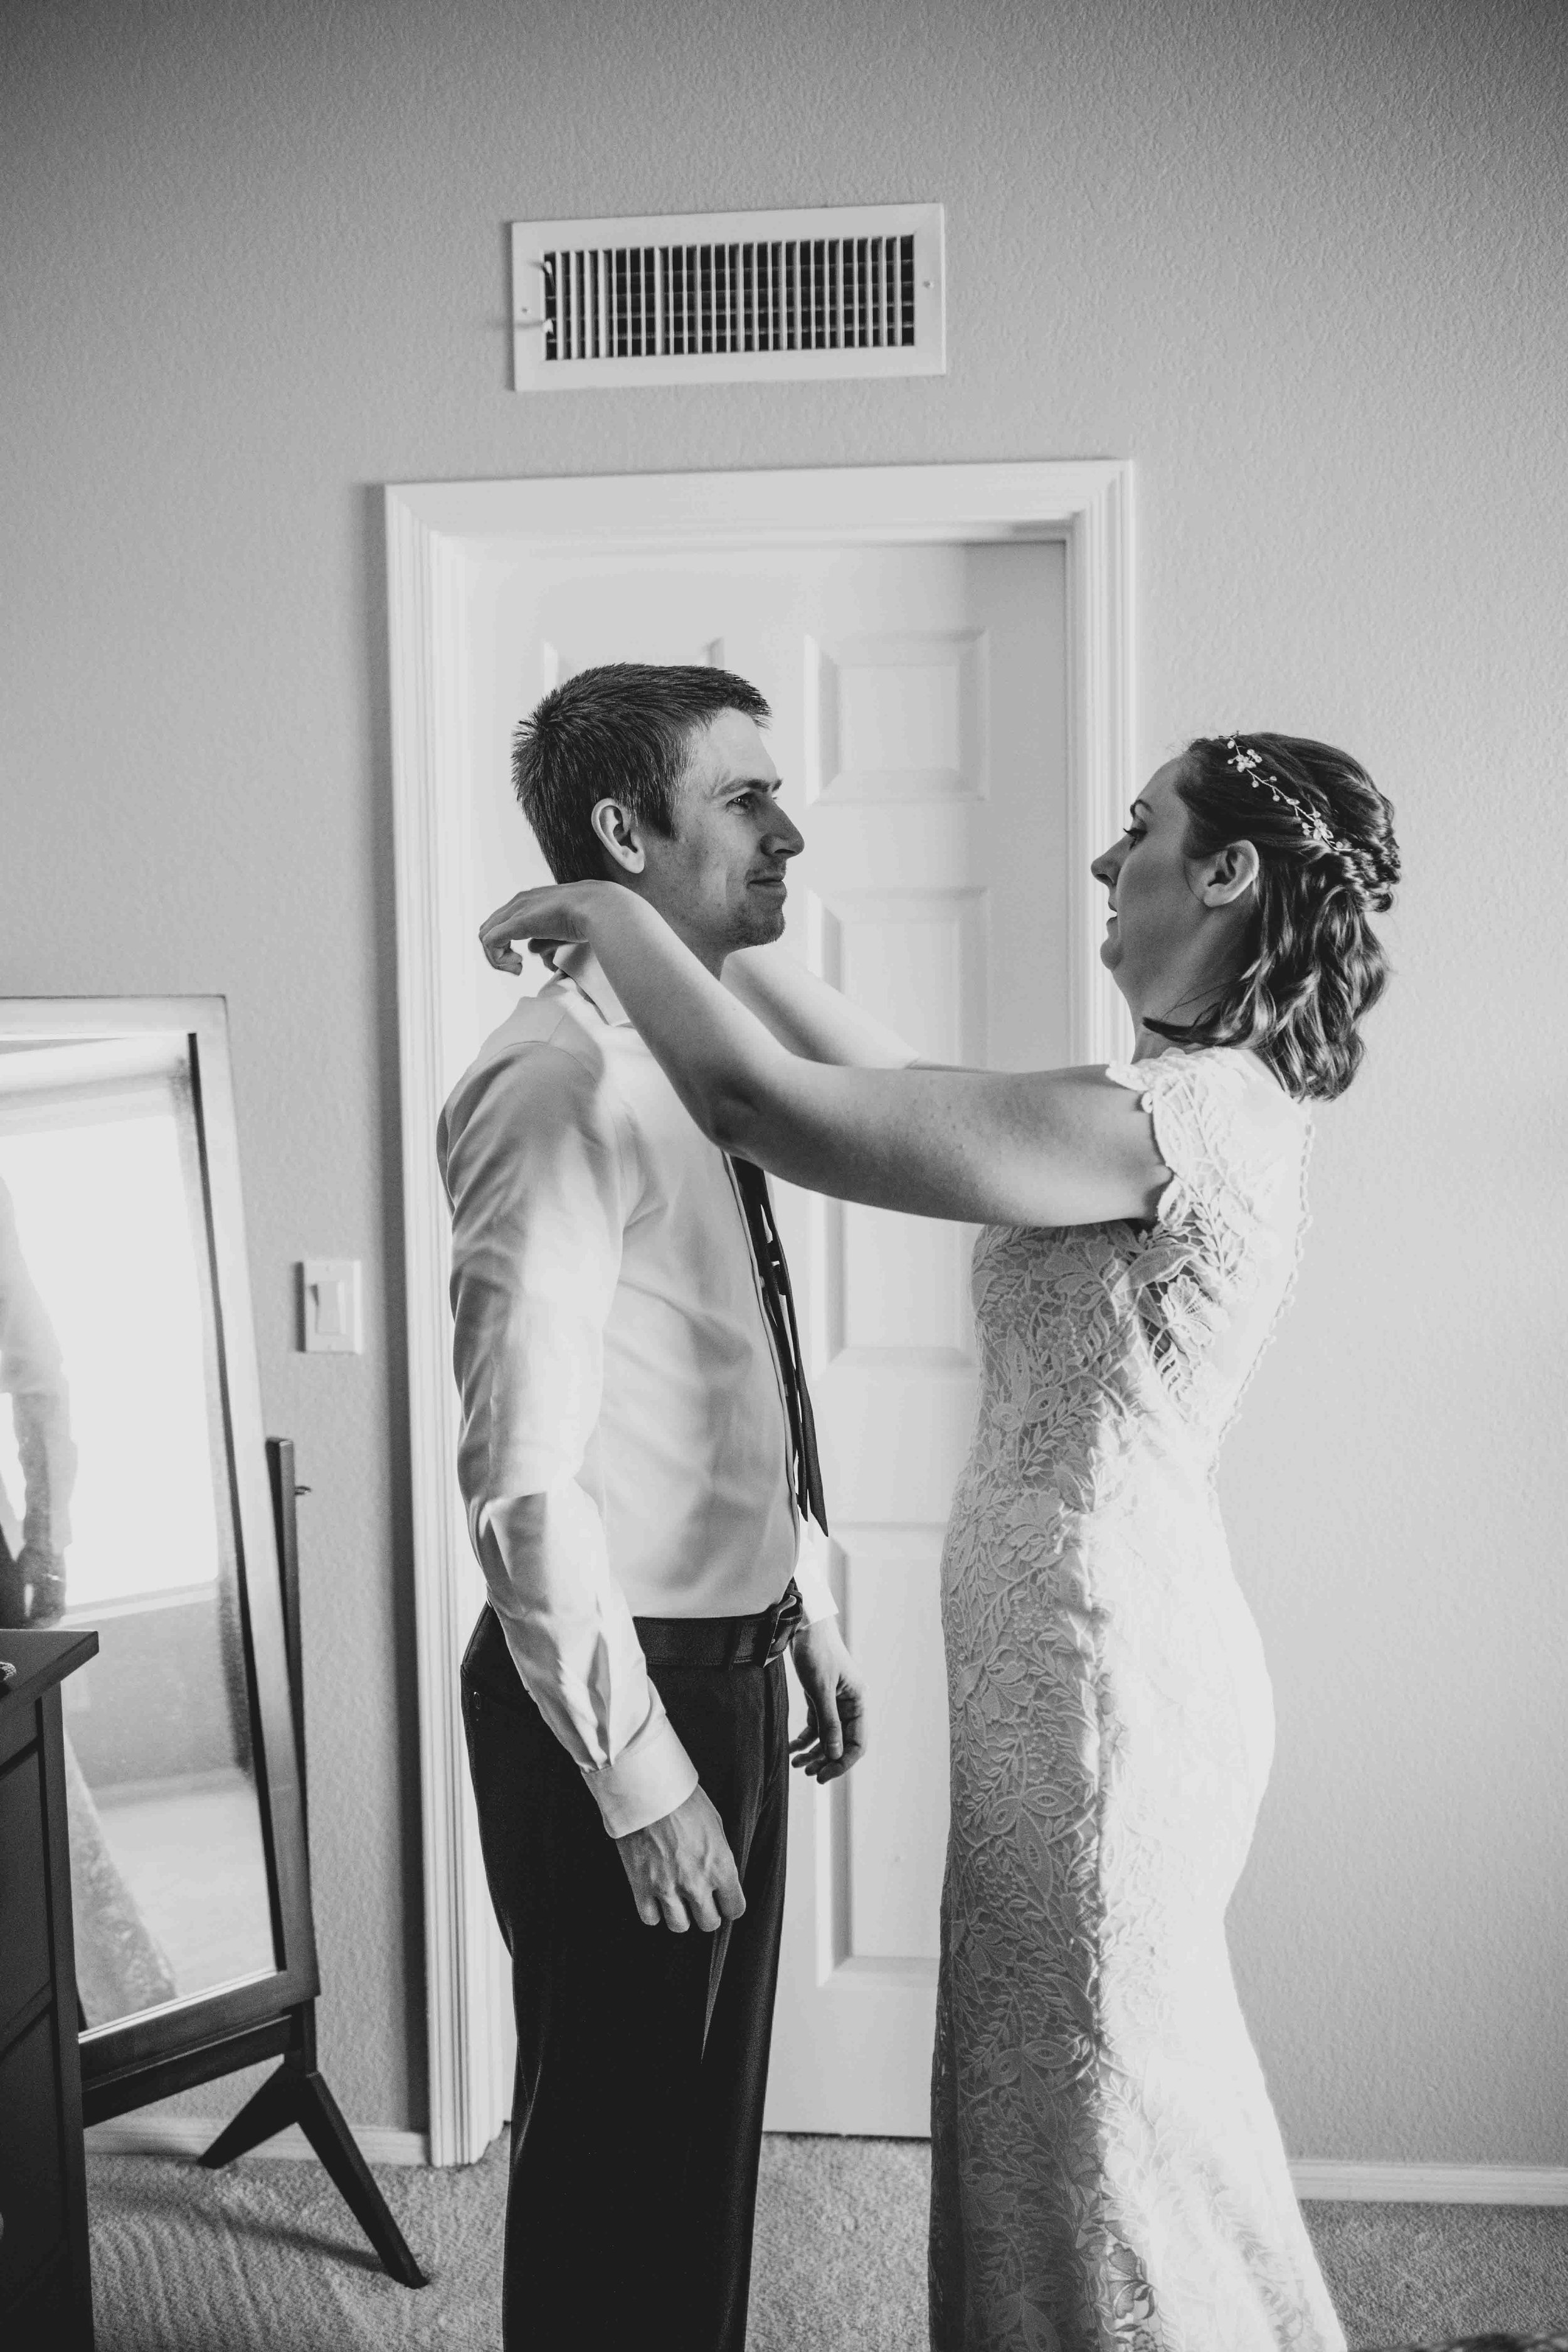 Bride and Groom getting ready together for their wedding day at home by Gilbert Wedding Photographer Jennifer Lind Schutsky.